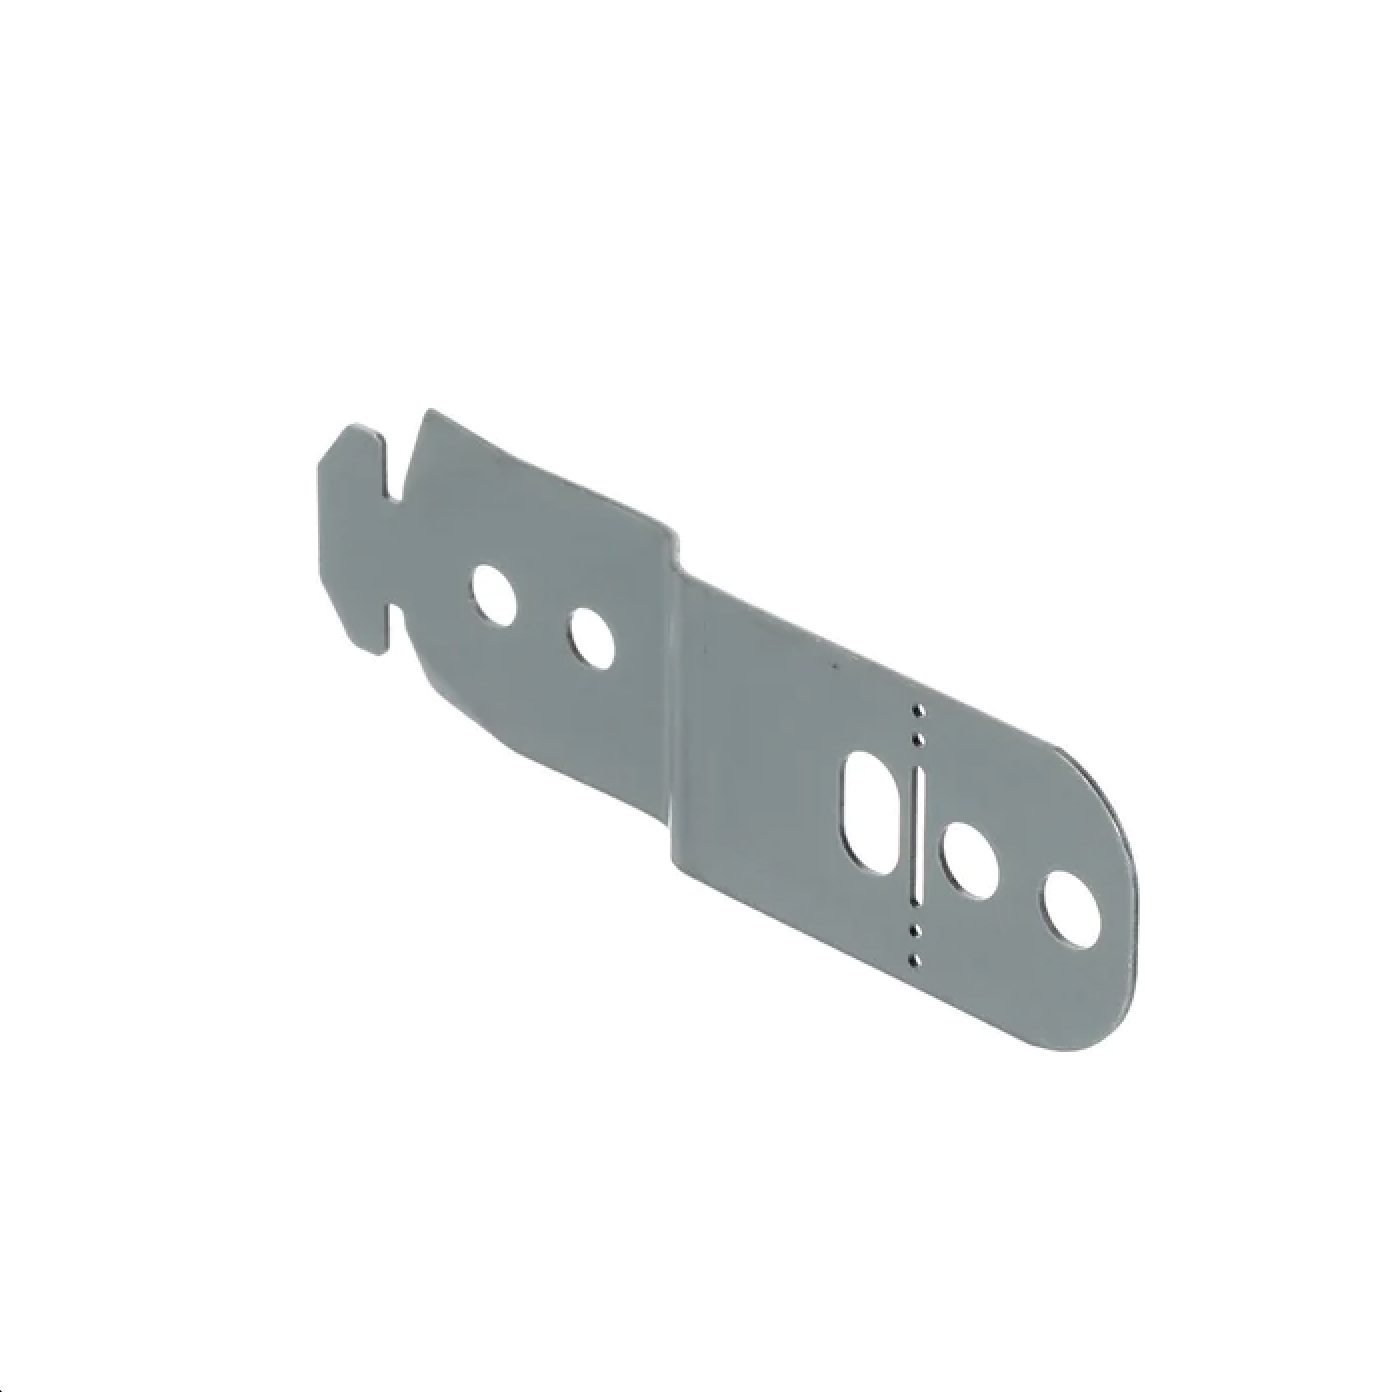 Dishwasher Mounting Brackets Compatible With Bosch Model Numbers  SHX45M02UC, SHX45M05UC, SHX45M06UC, SHX45P01UC 